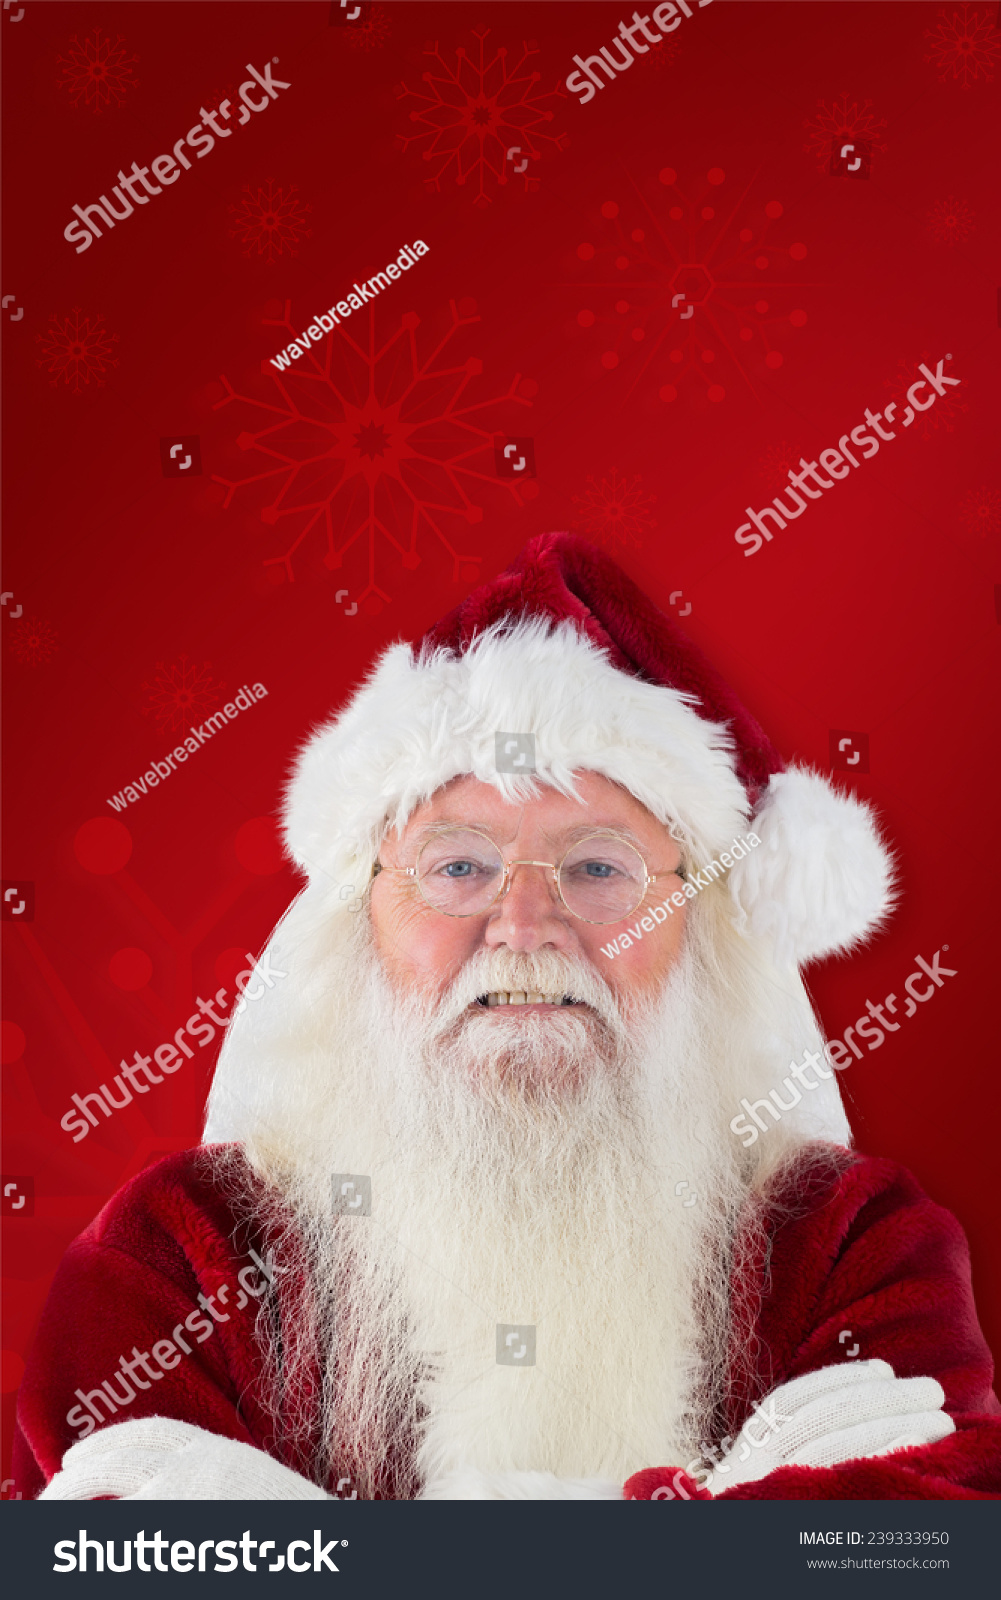 Santa smiles with folded arms against red background #239333950